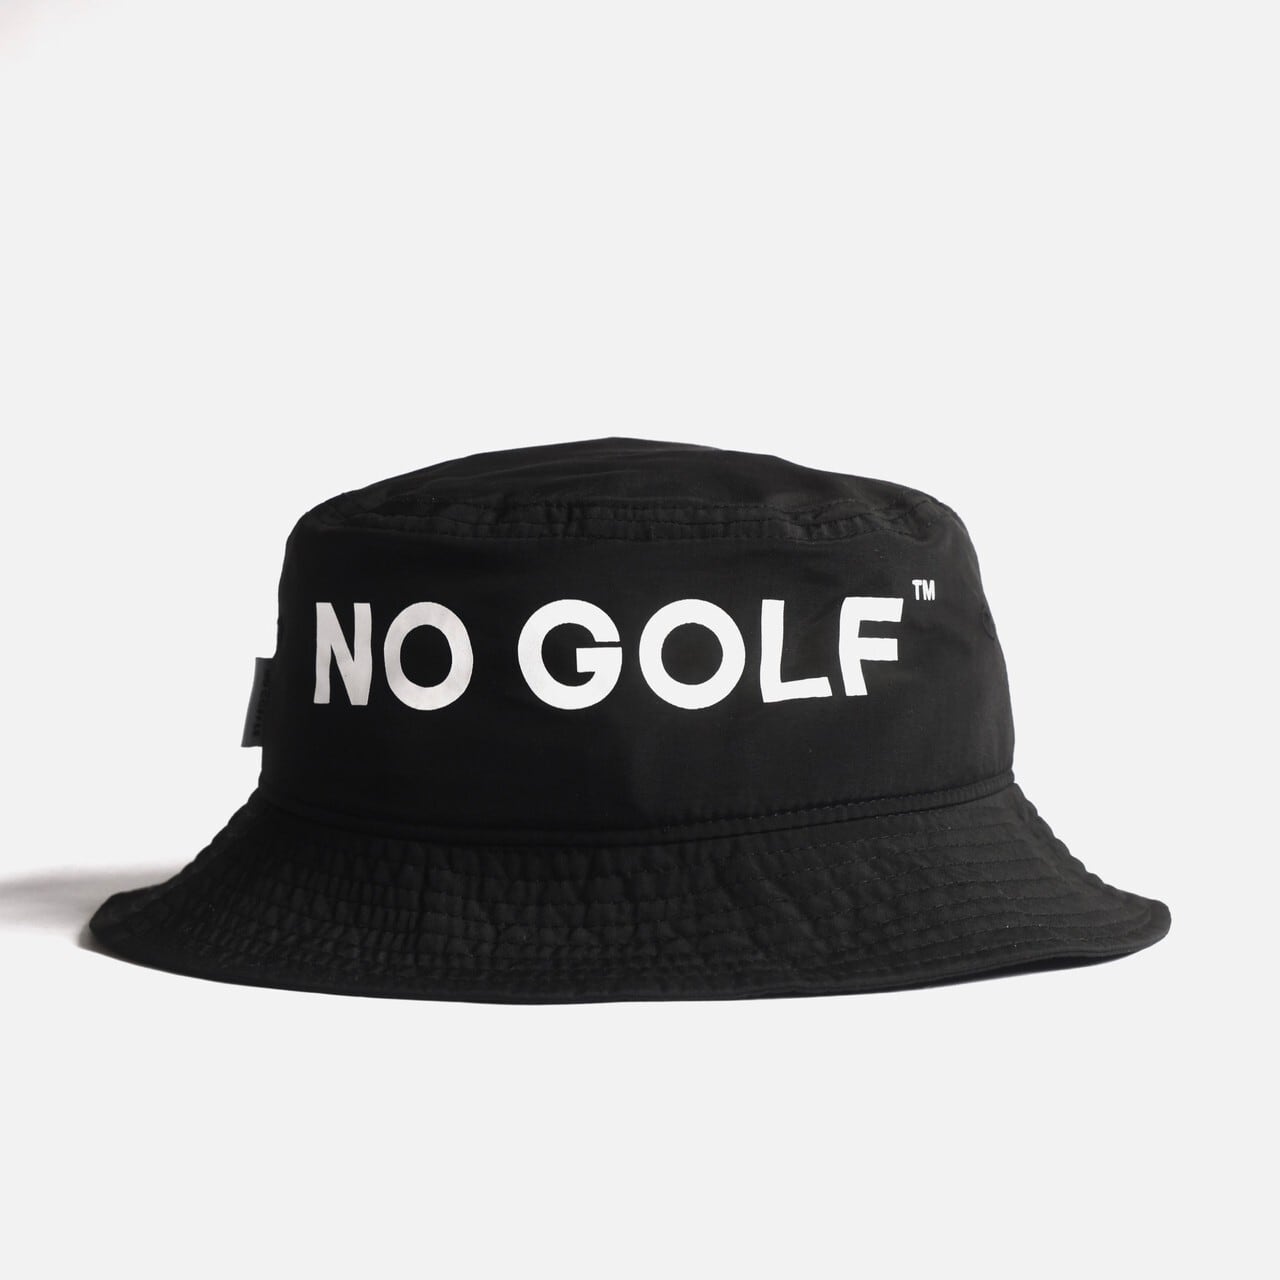 NO GOLF clubhouse ナイロン ハット 黒 ブラック L-XL-